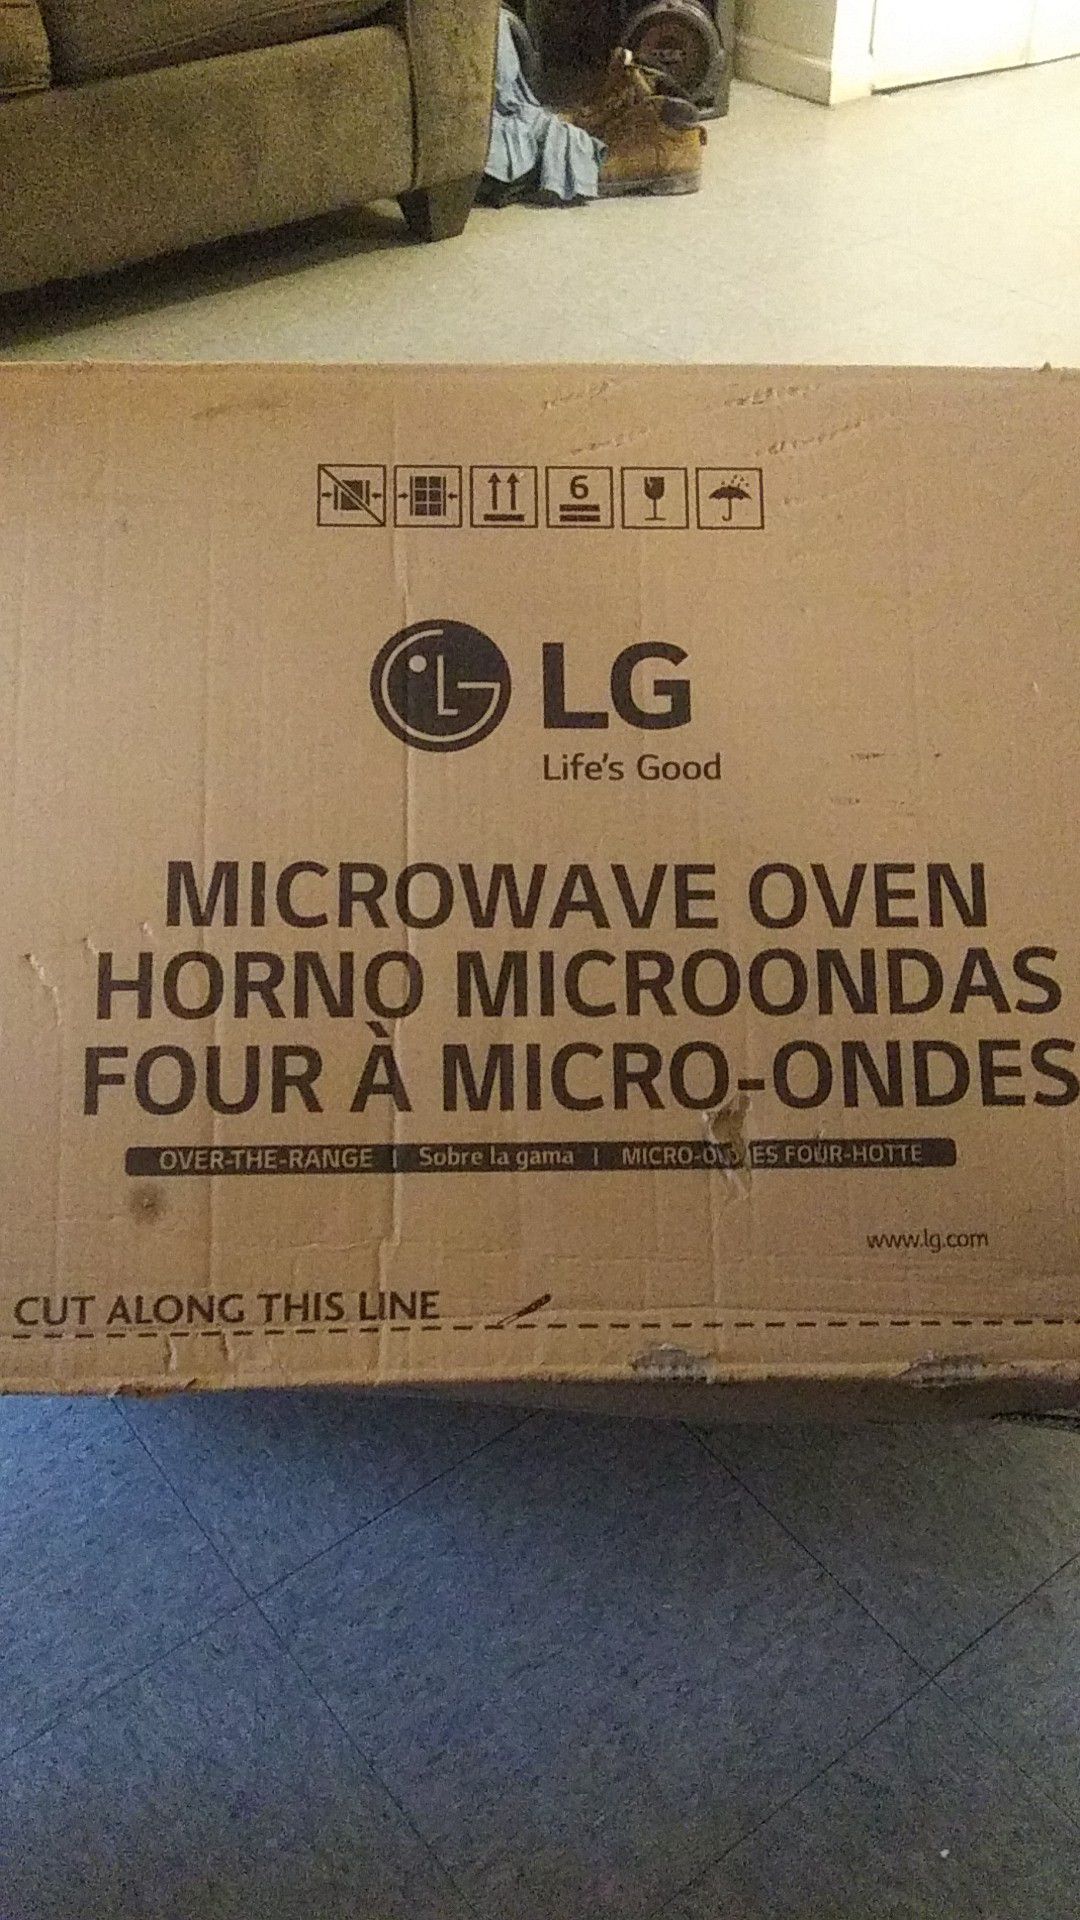 Lg over the range microwave oven